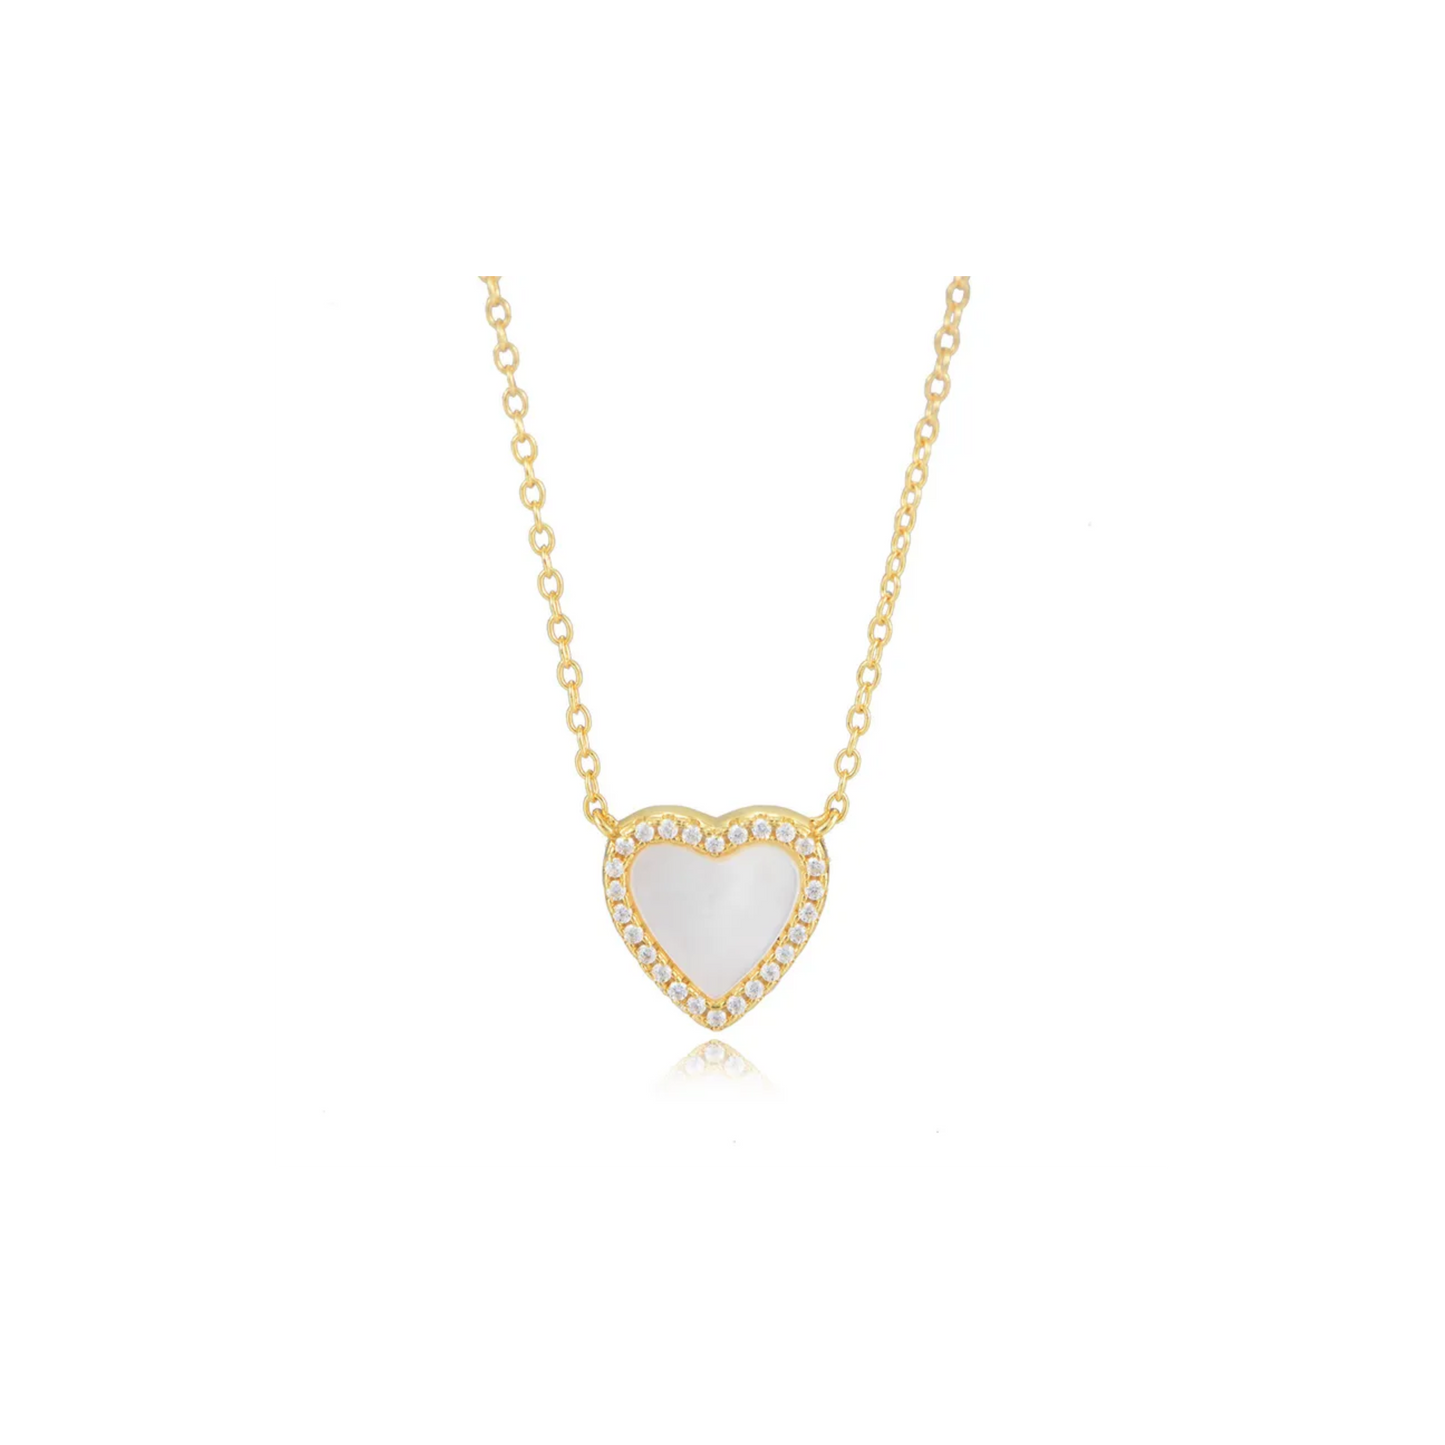 Real love necklace